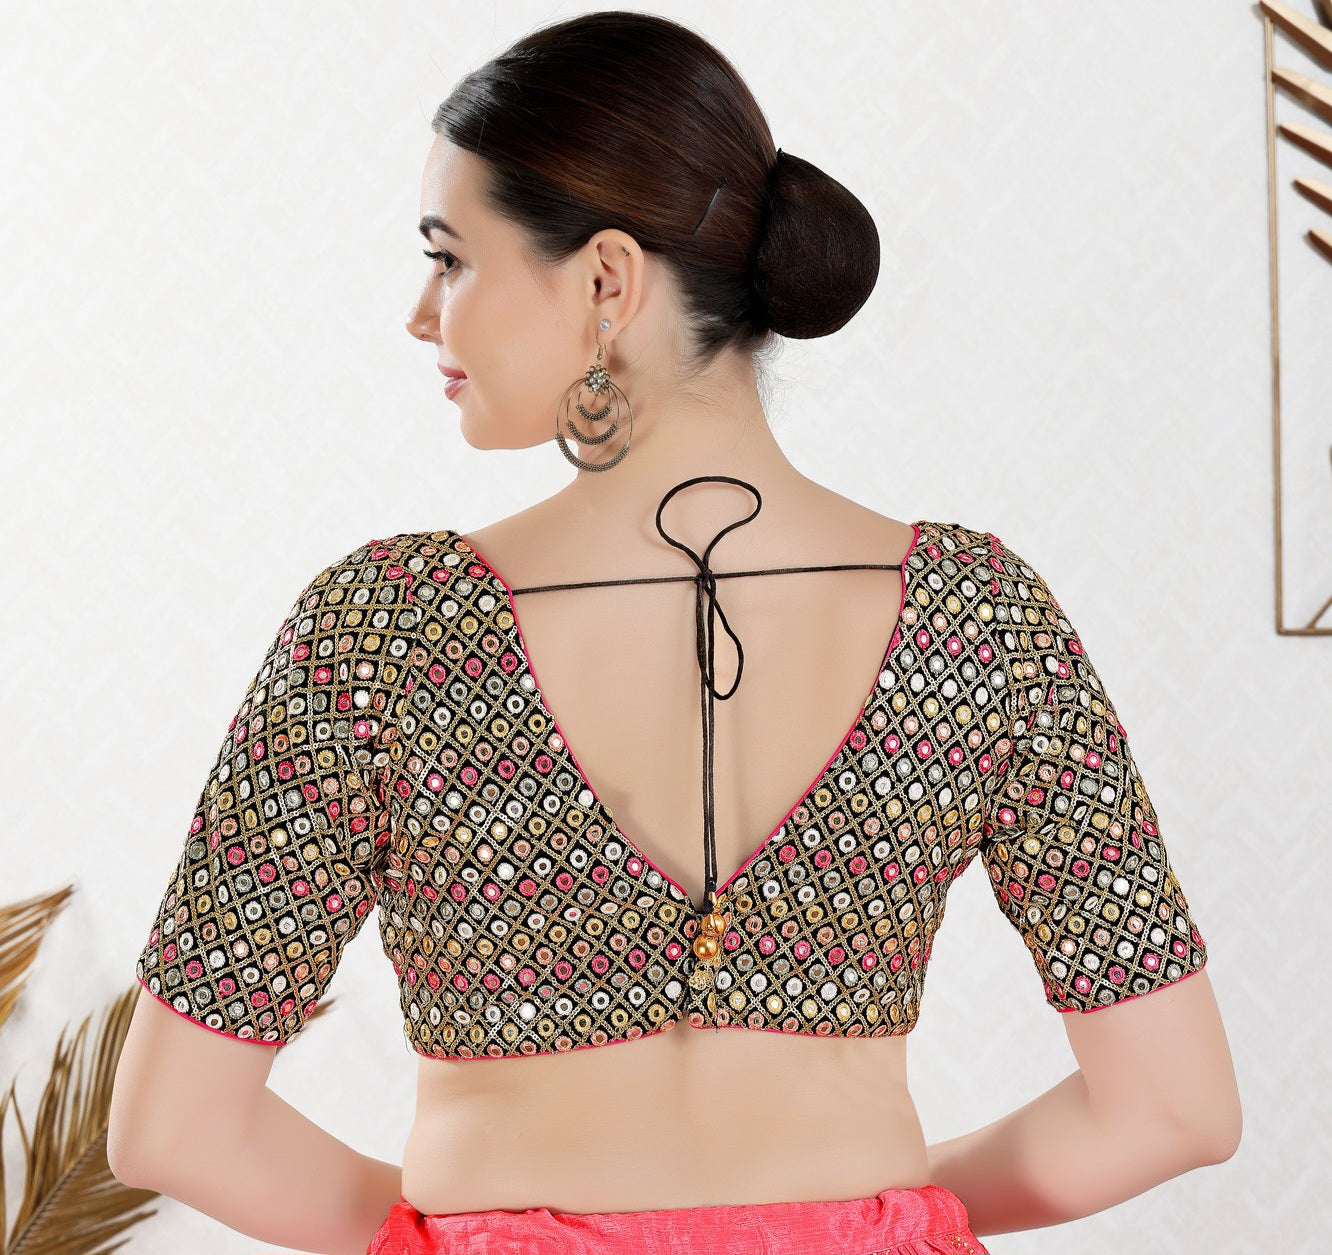 Georgette Saree Blouse and Crop Top : Exquisite embroidery